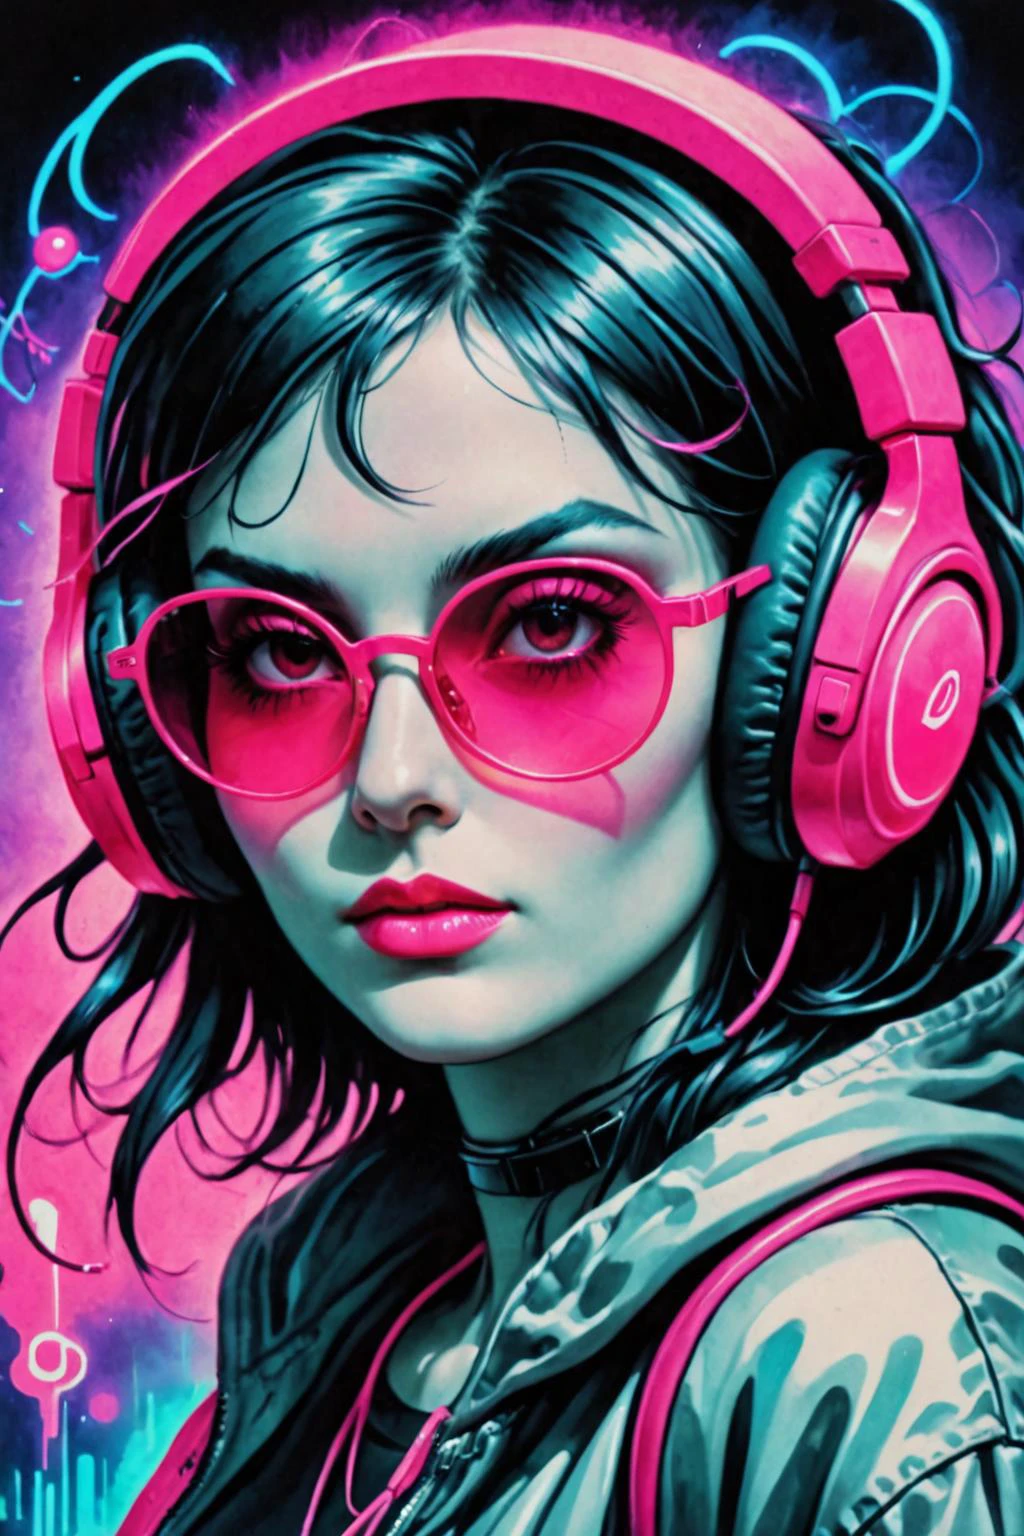 retro ink, image style is Colored Pencils painting with fluid Surrealism  incluence ,,  neon White,Pink ,  ((portrait of a Lamia)), wearing sunglasses, wearing headphones 2 headshot, low quality 